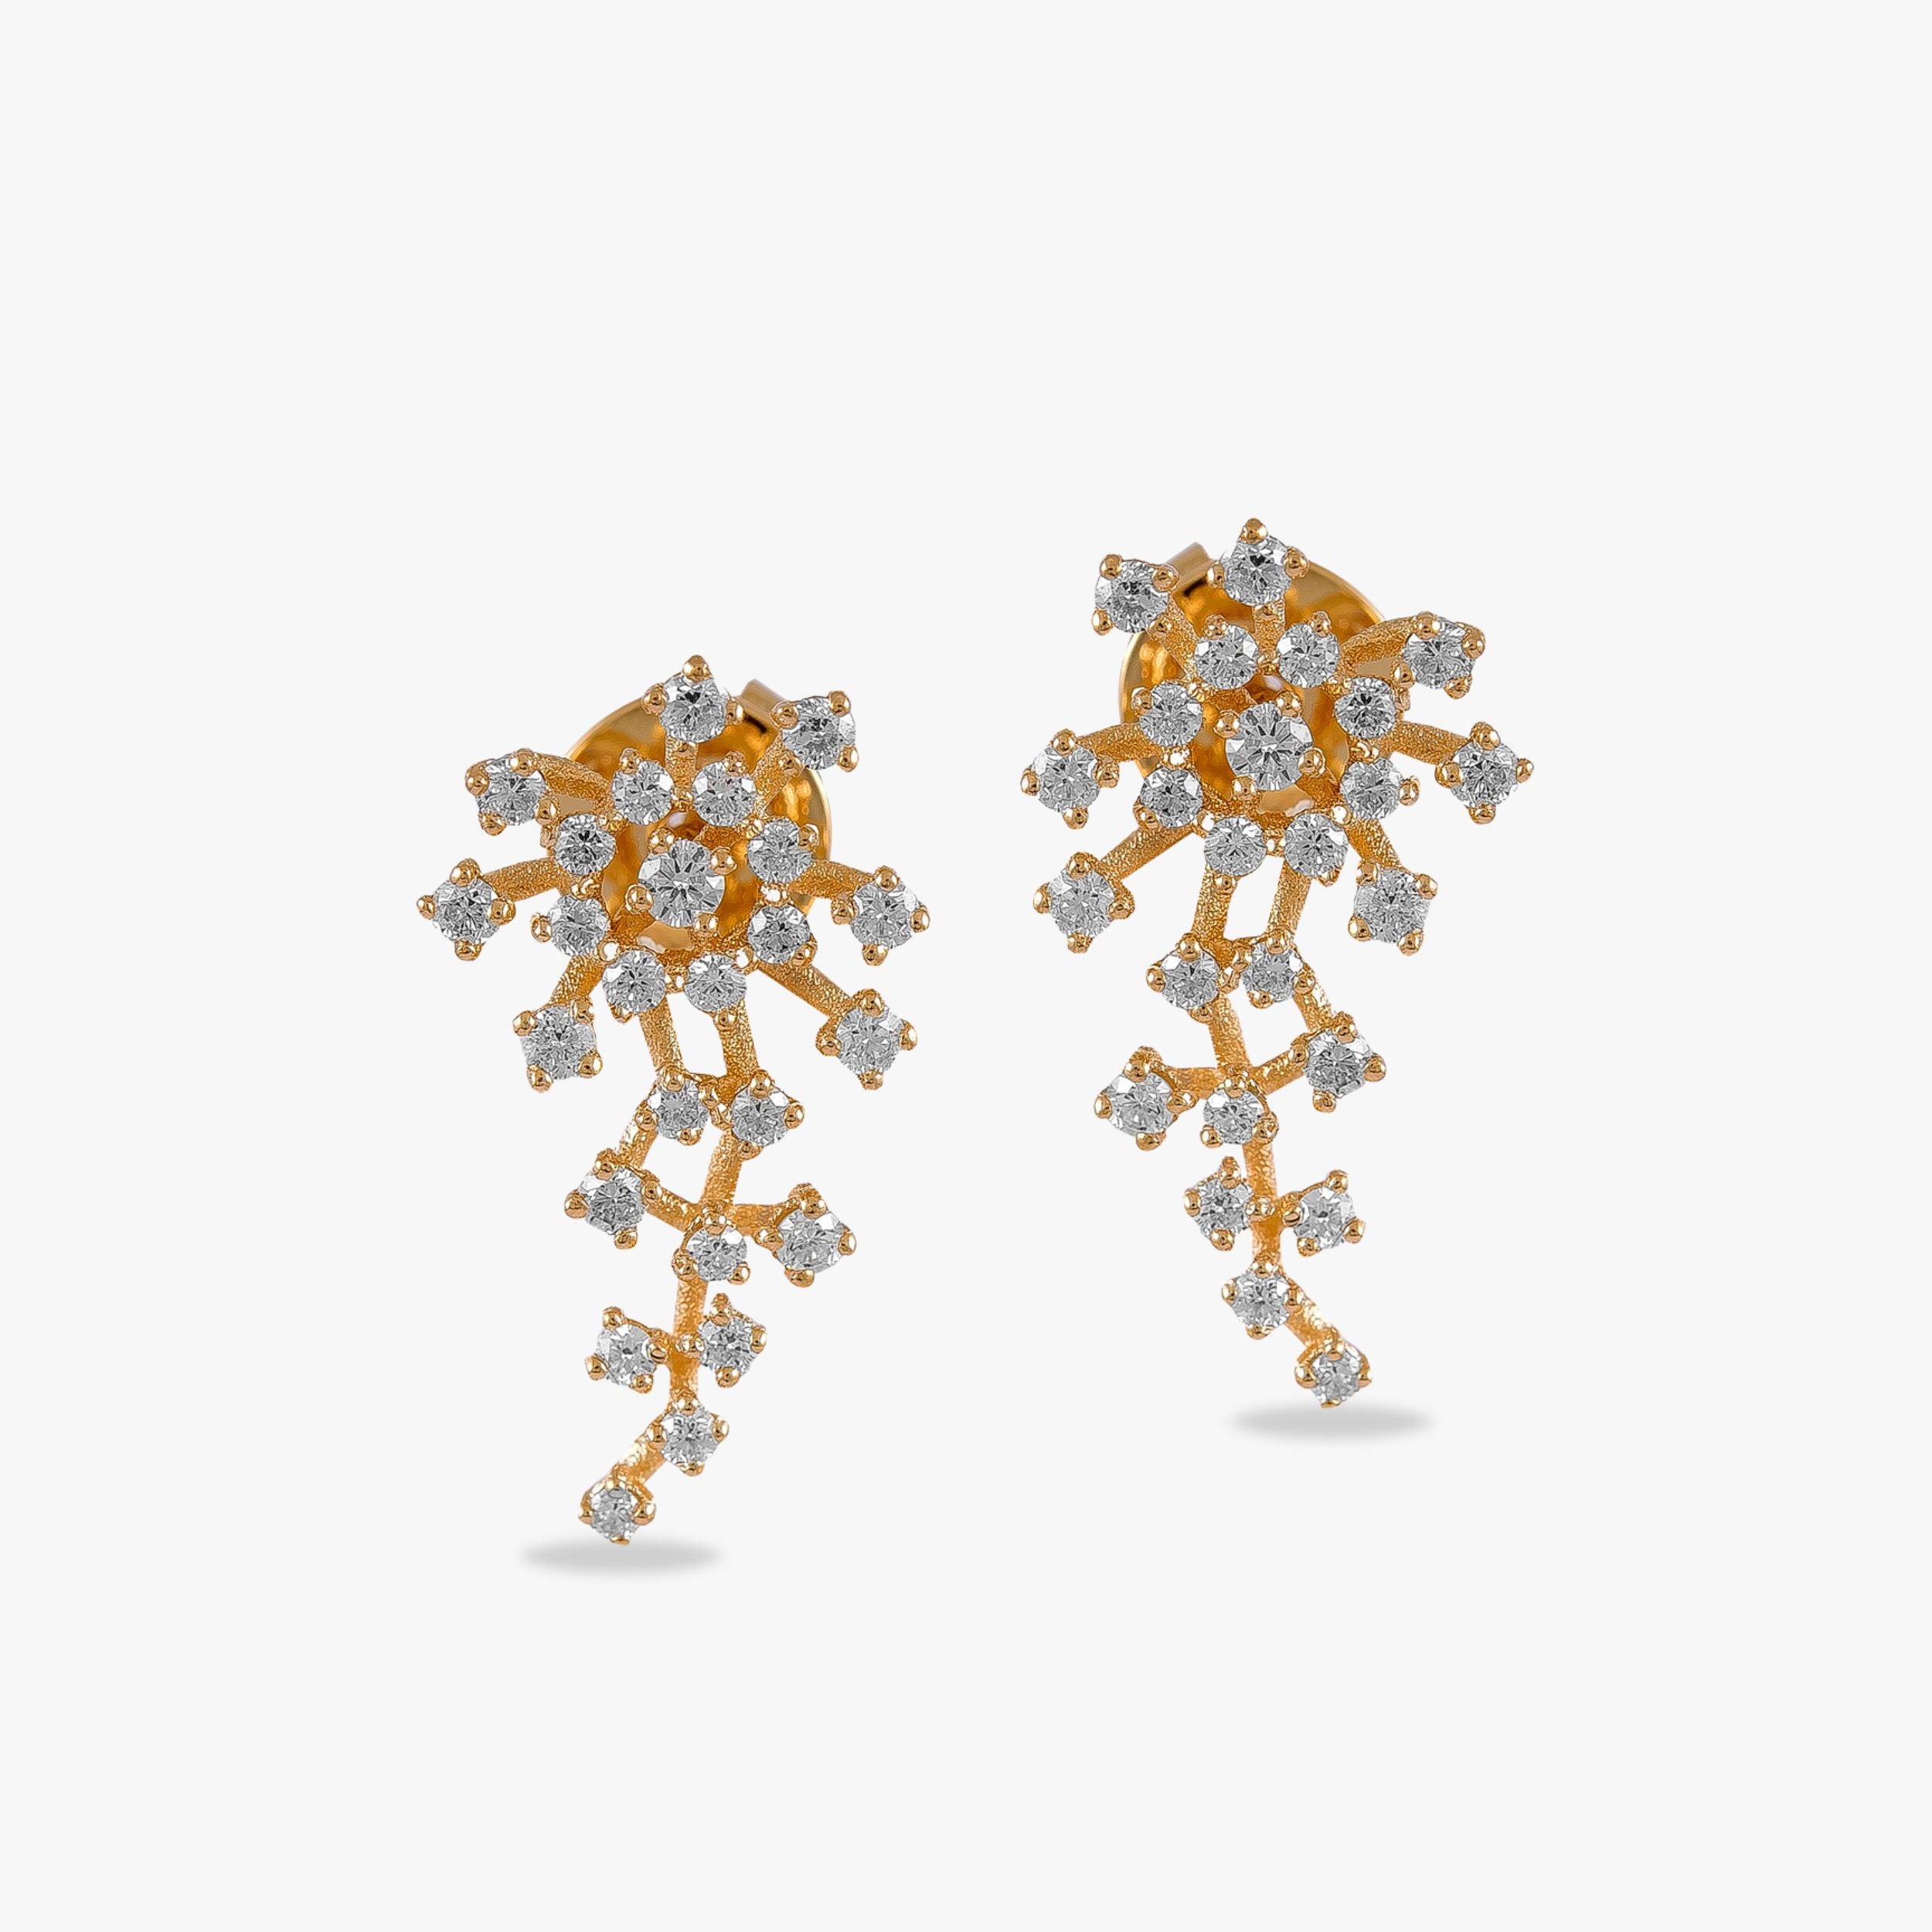 Diamond Earrings Available in 14K and 18K Gold / The Diamond Comet